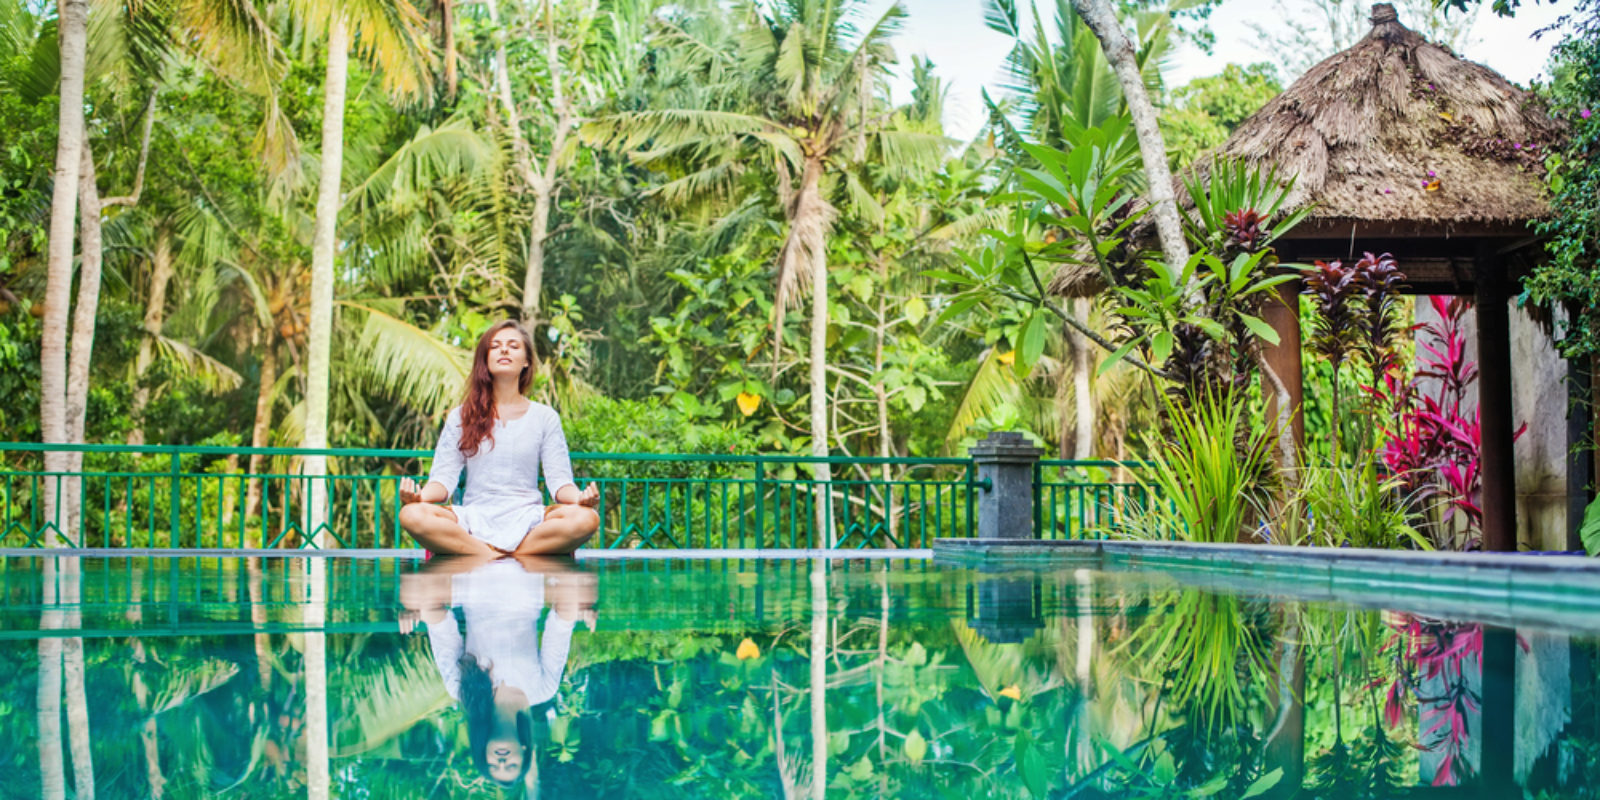 Whatever it is that draws you in, wellness travel has a way of transforming outlooks on life. The goal, as with any journey, is to come back different from when you left. There are plenty of unique Virtuoso wellness getaways available to Virtuoso clients. These range from relaxing spas to ...